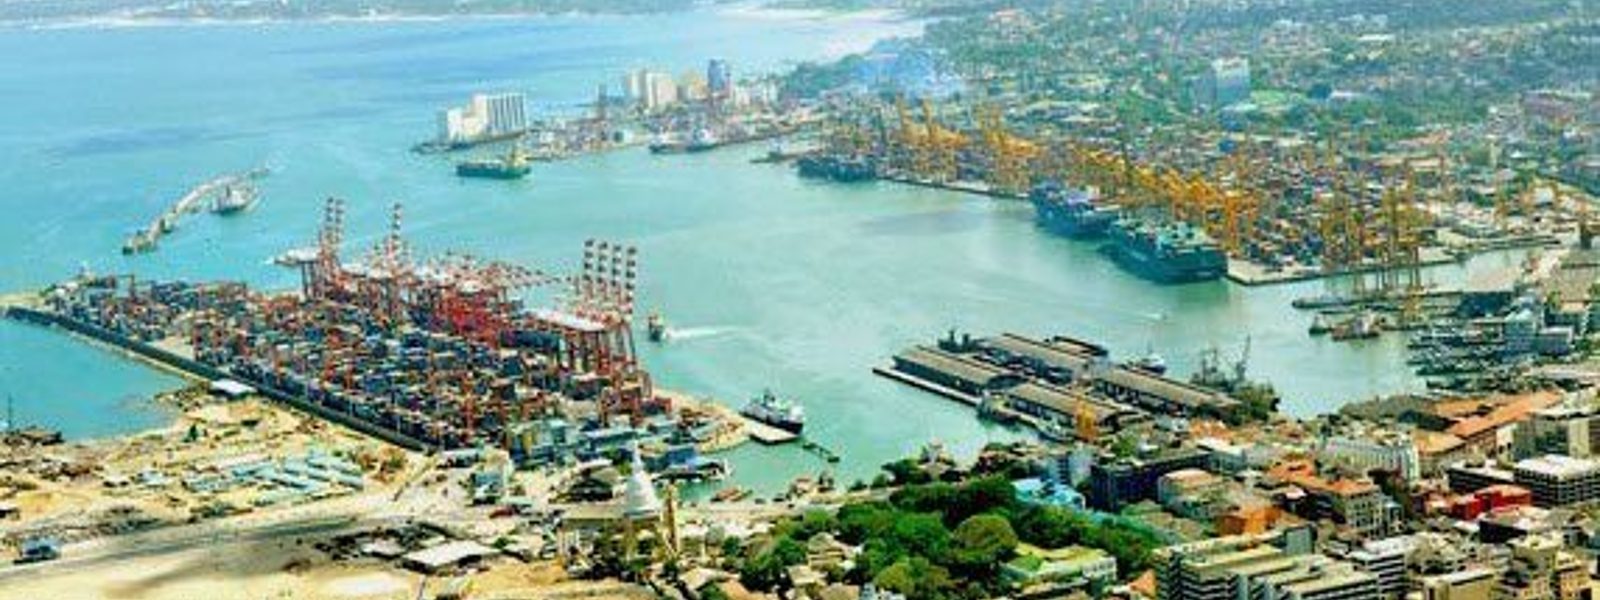 Sri Lanka’s strategic locations falling into hands of foreign nations?